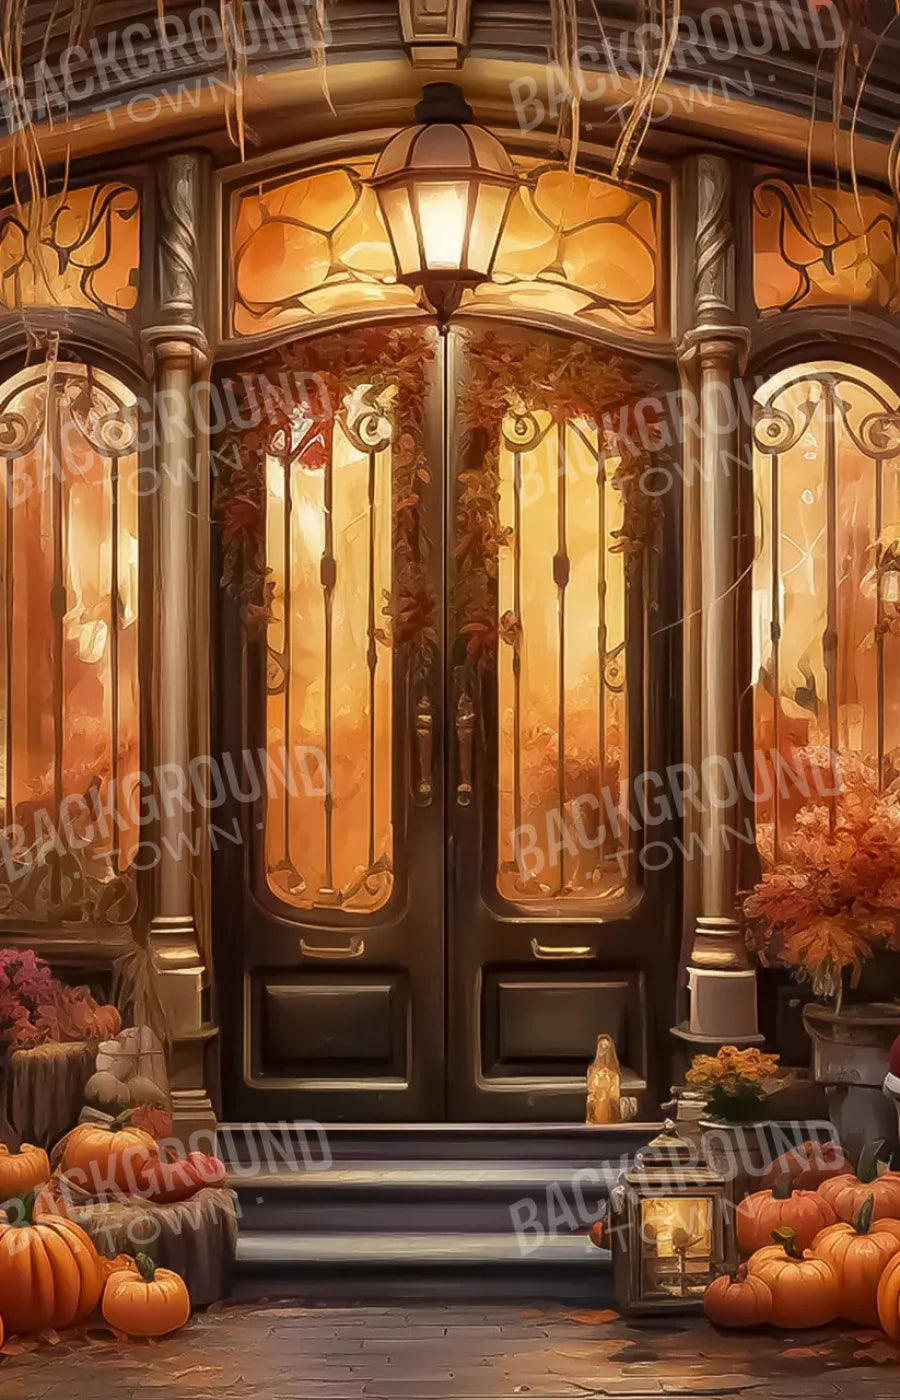 Autumn Store Front 2 8X12 Ultracloth ( 96 X 144 Inch ) Backdrop